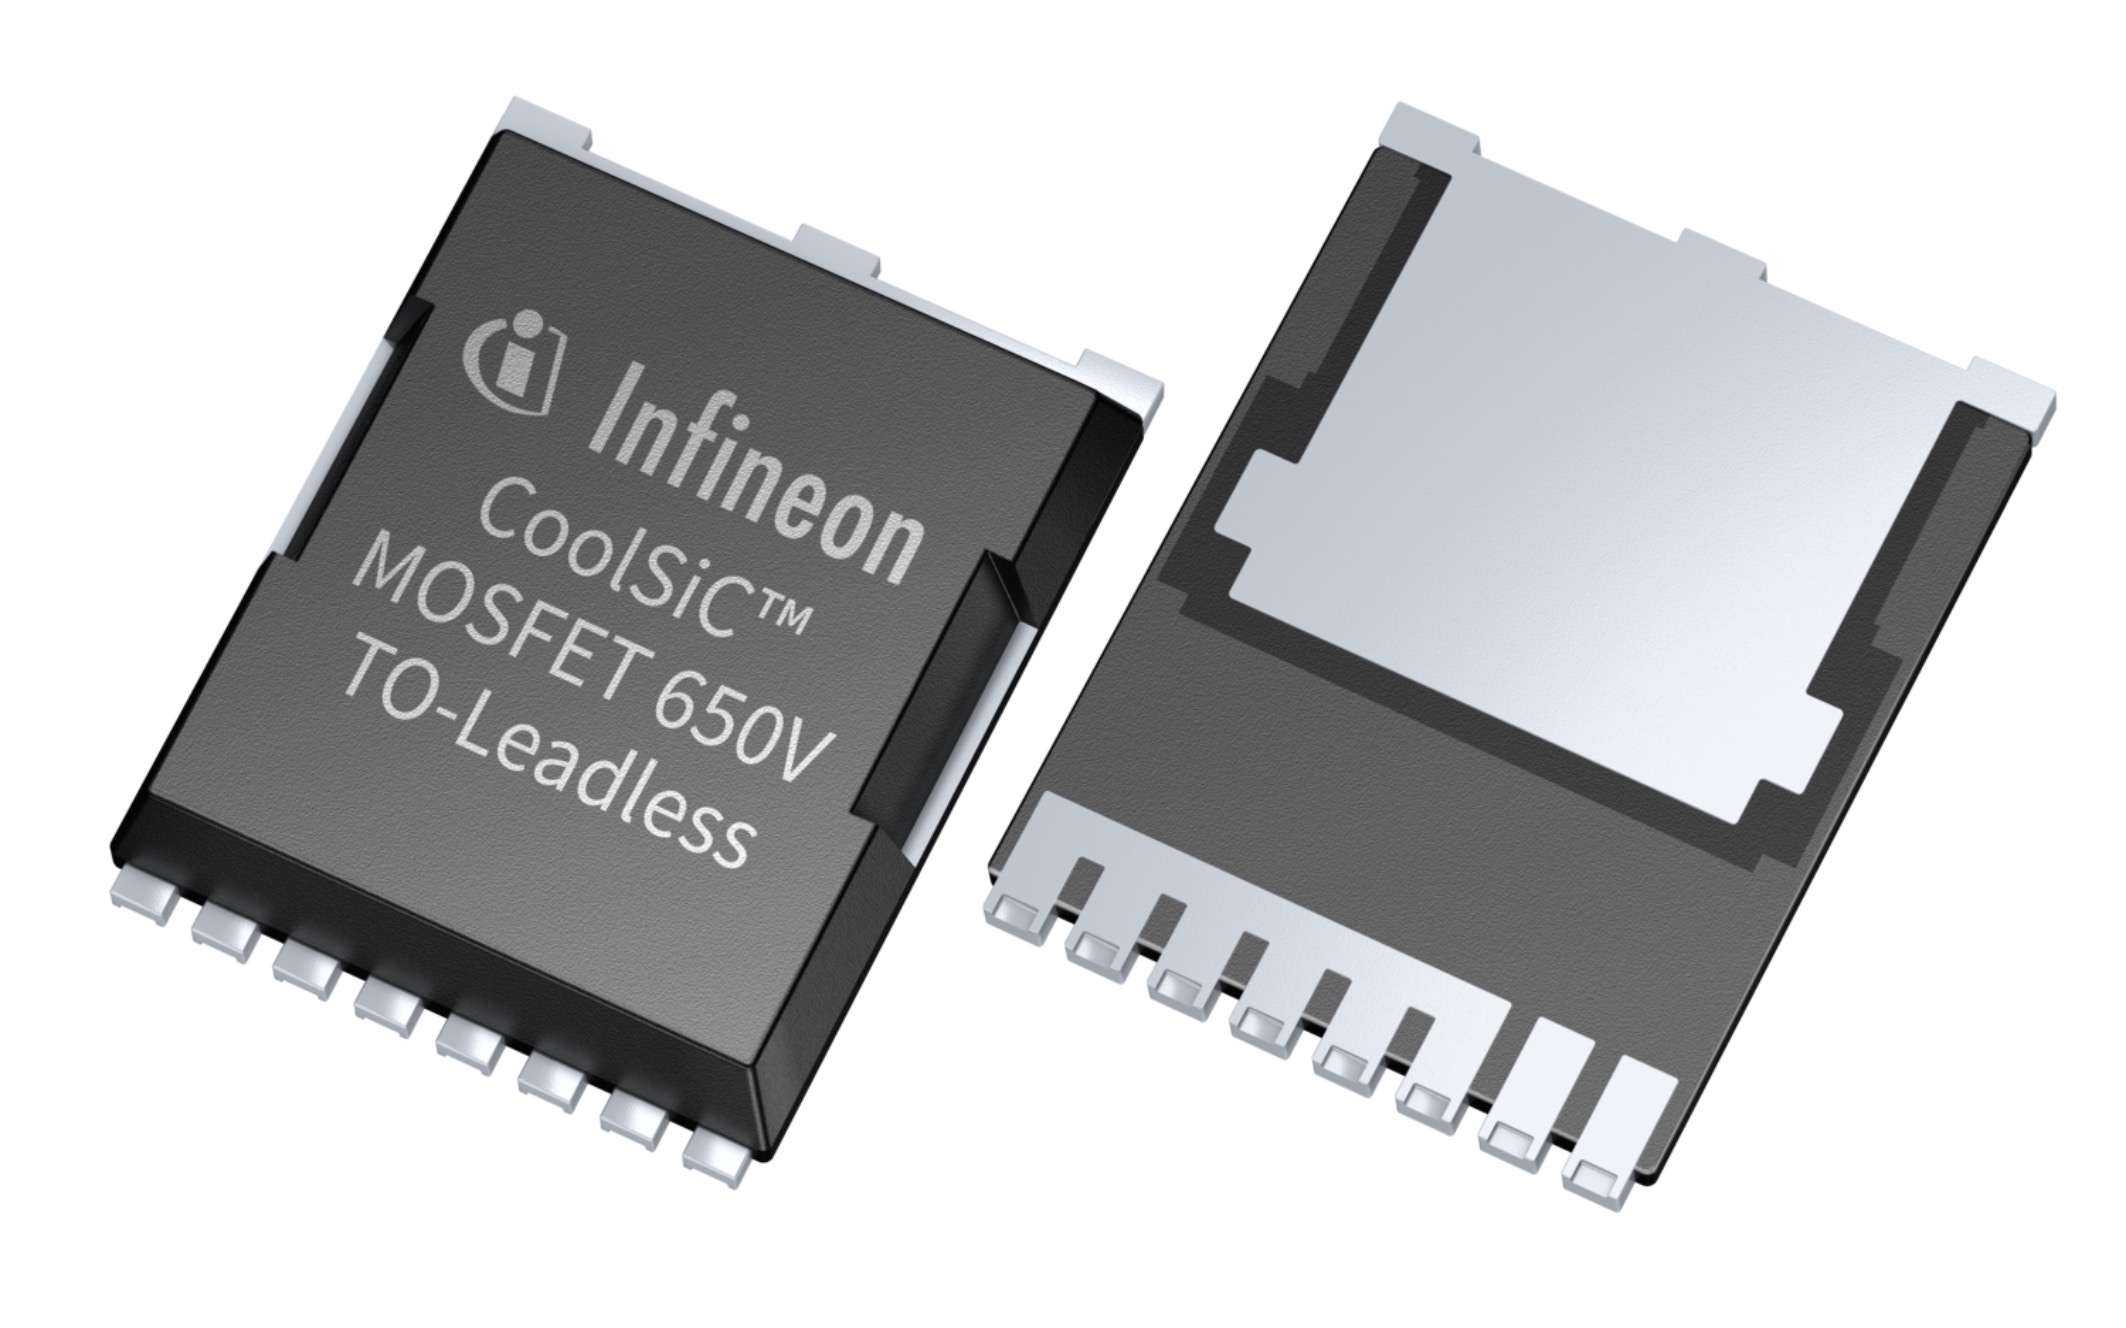 Infineon Adds 650 V TOLL Portfolio to its CoolSiC MOSFET Family for Better Thermal Performance, Power Density, and Easier Assembly